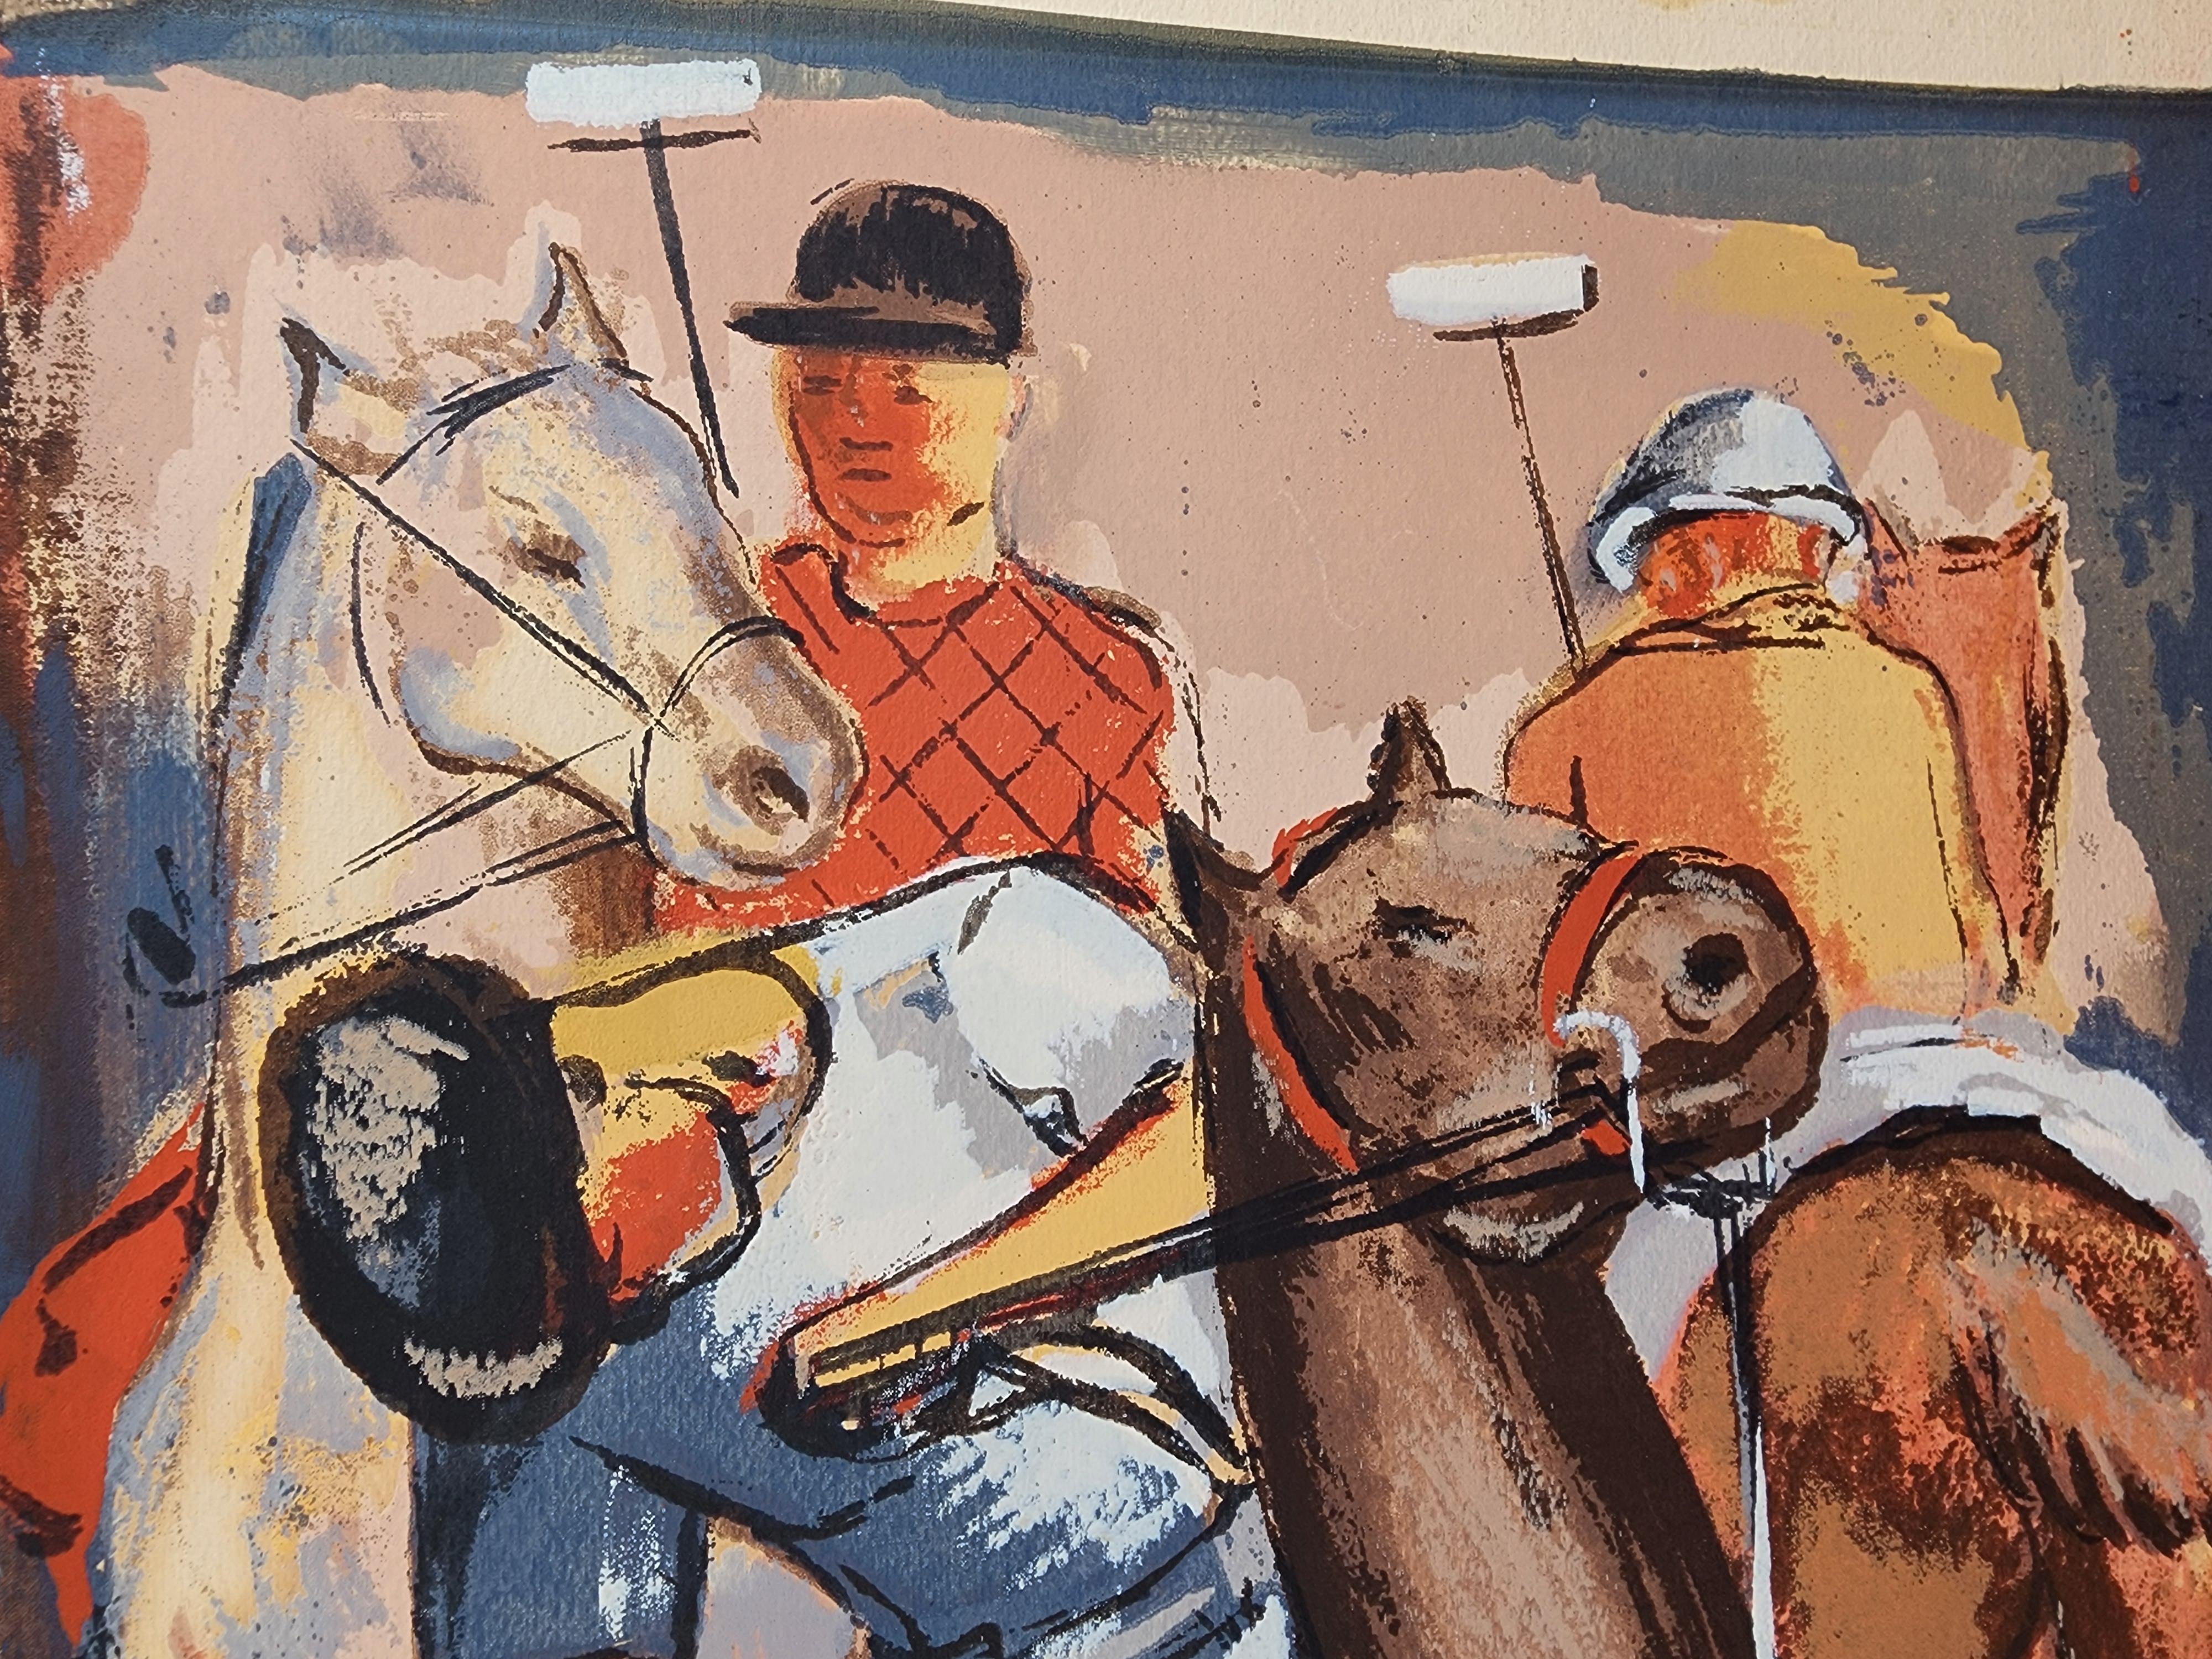 A wonderful screen print by Riva Helfond depicting a pair of polo players on horseback.
Helfond is known for her participation in the WPA and for her screen prints.
UNSIGNED